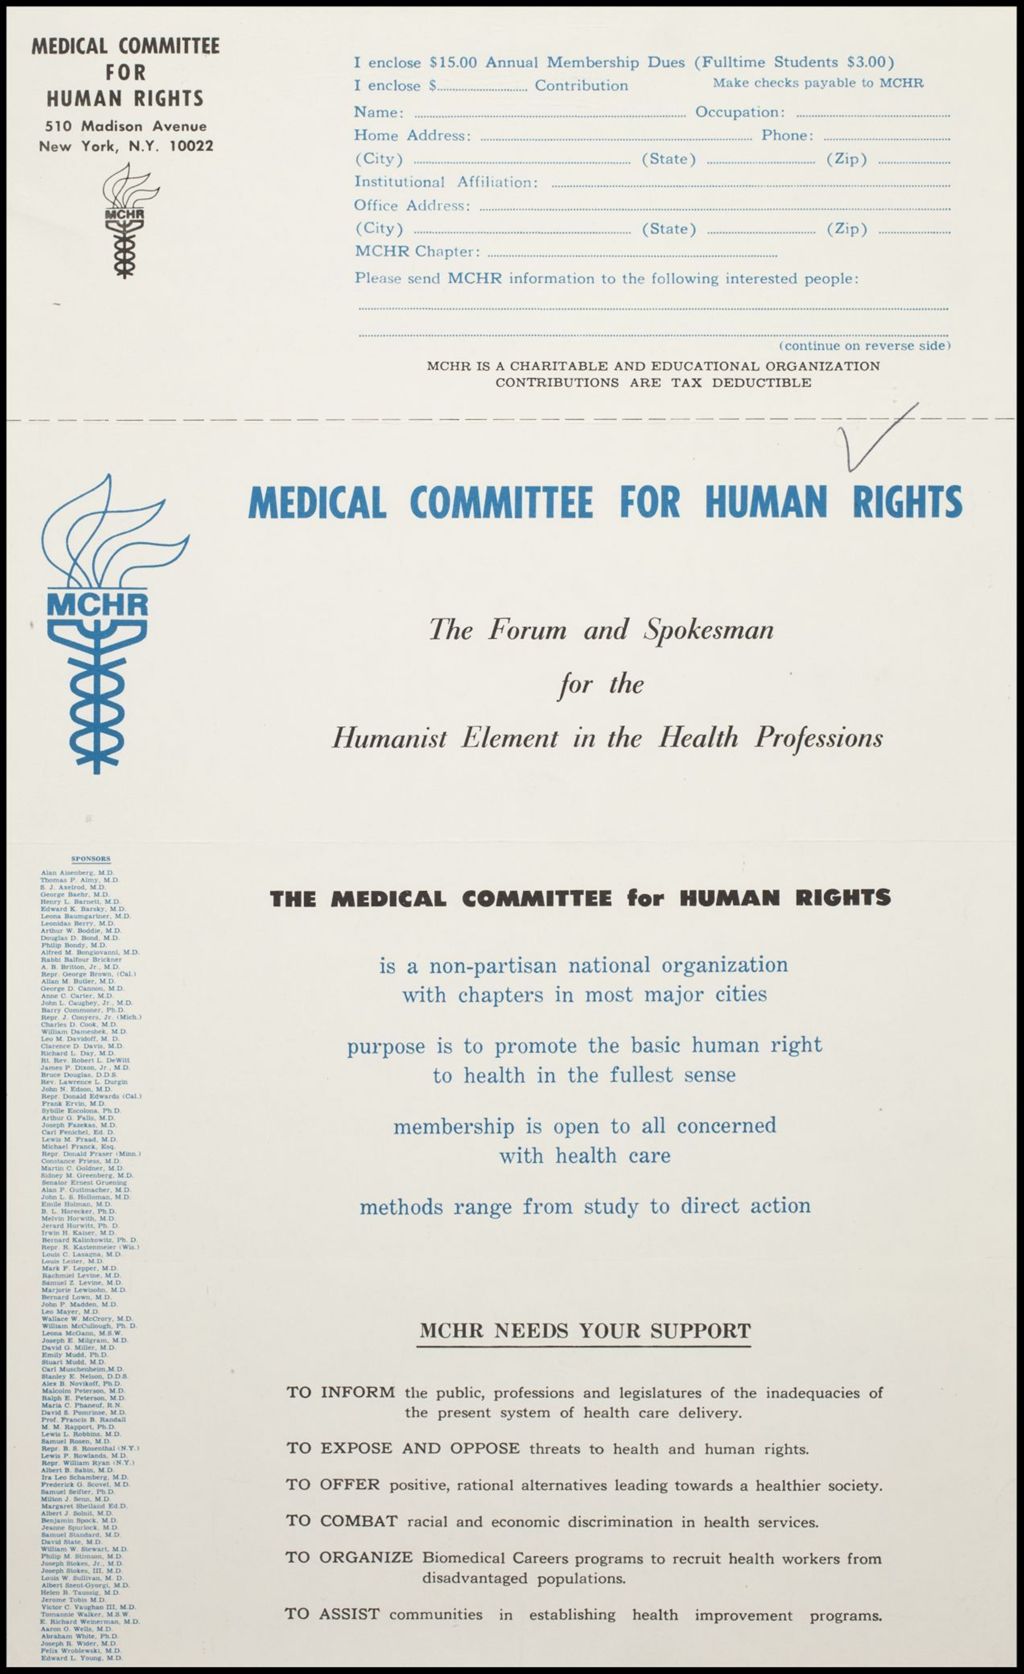 Medical Committee for Human Rights, 1968 (Folder IV-1053)